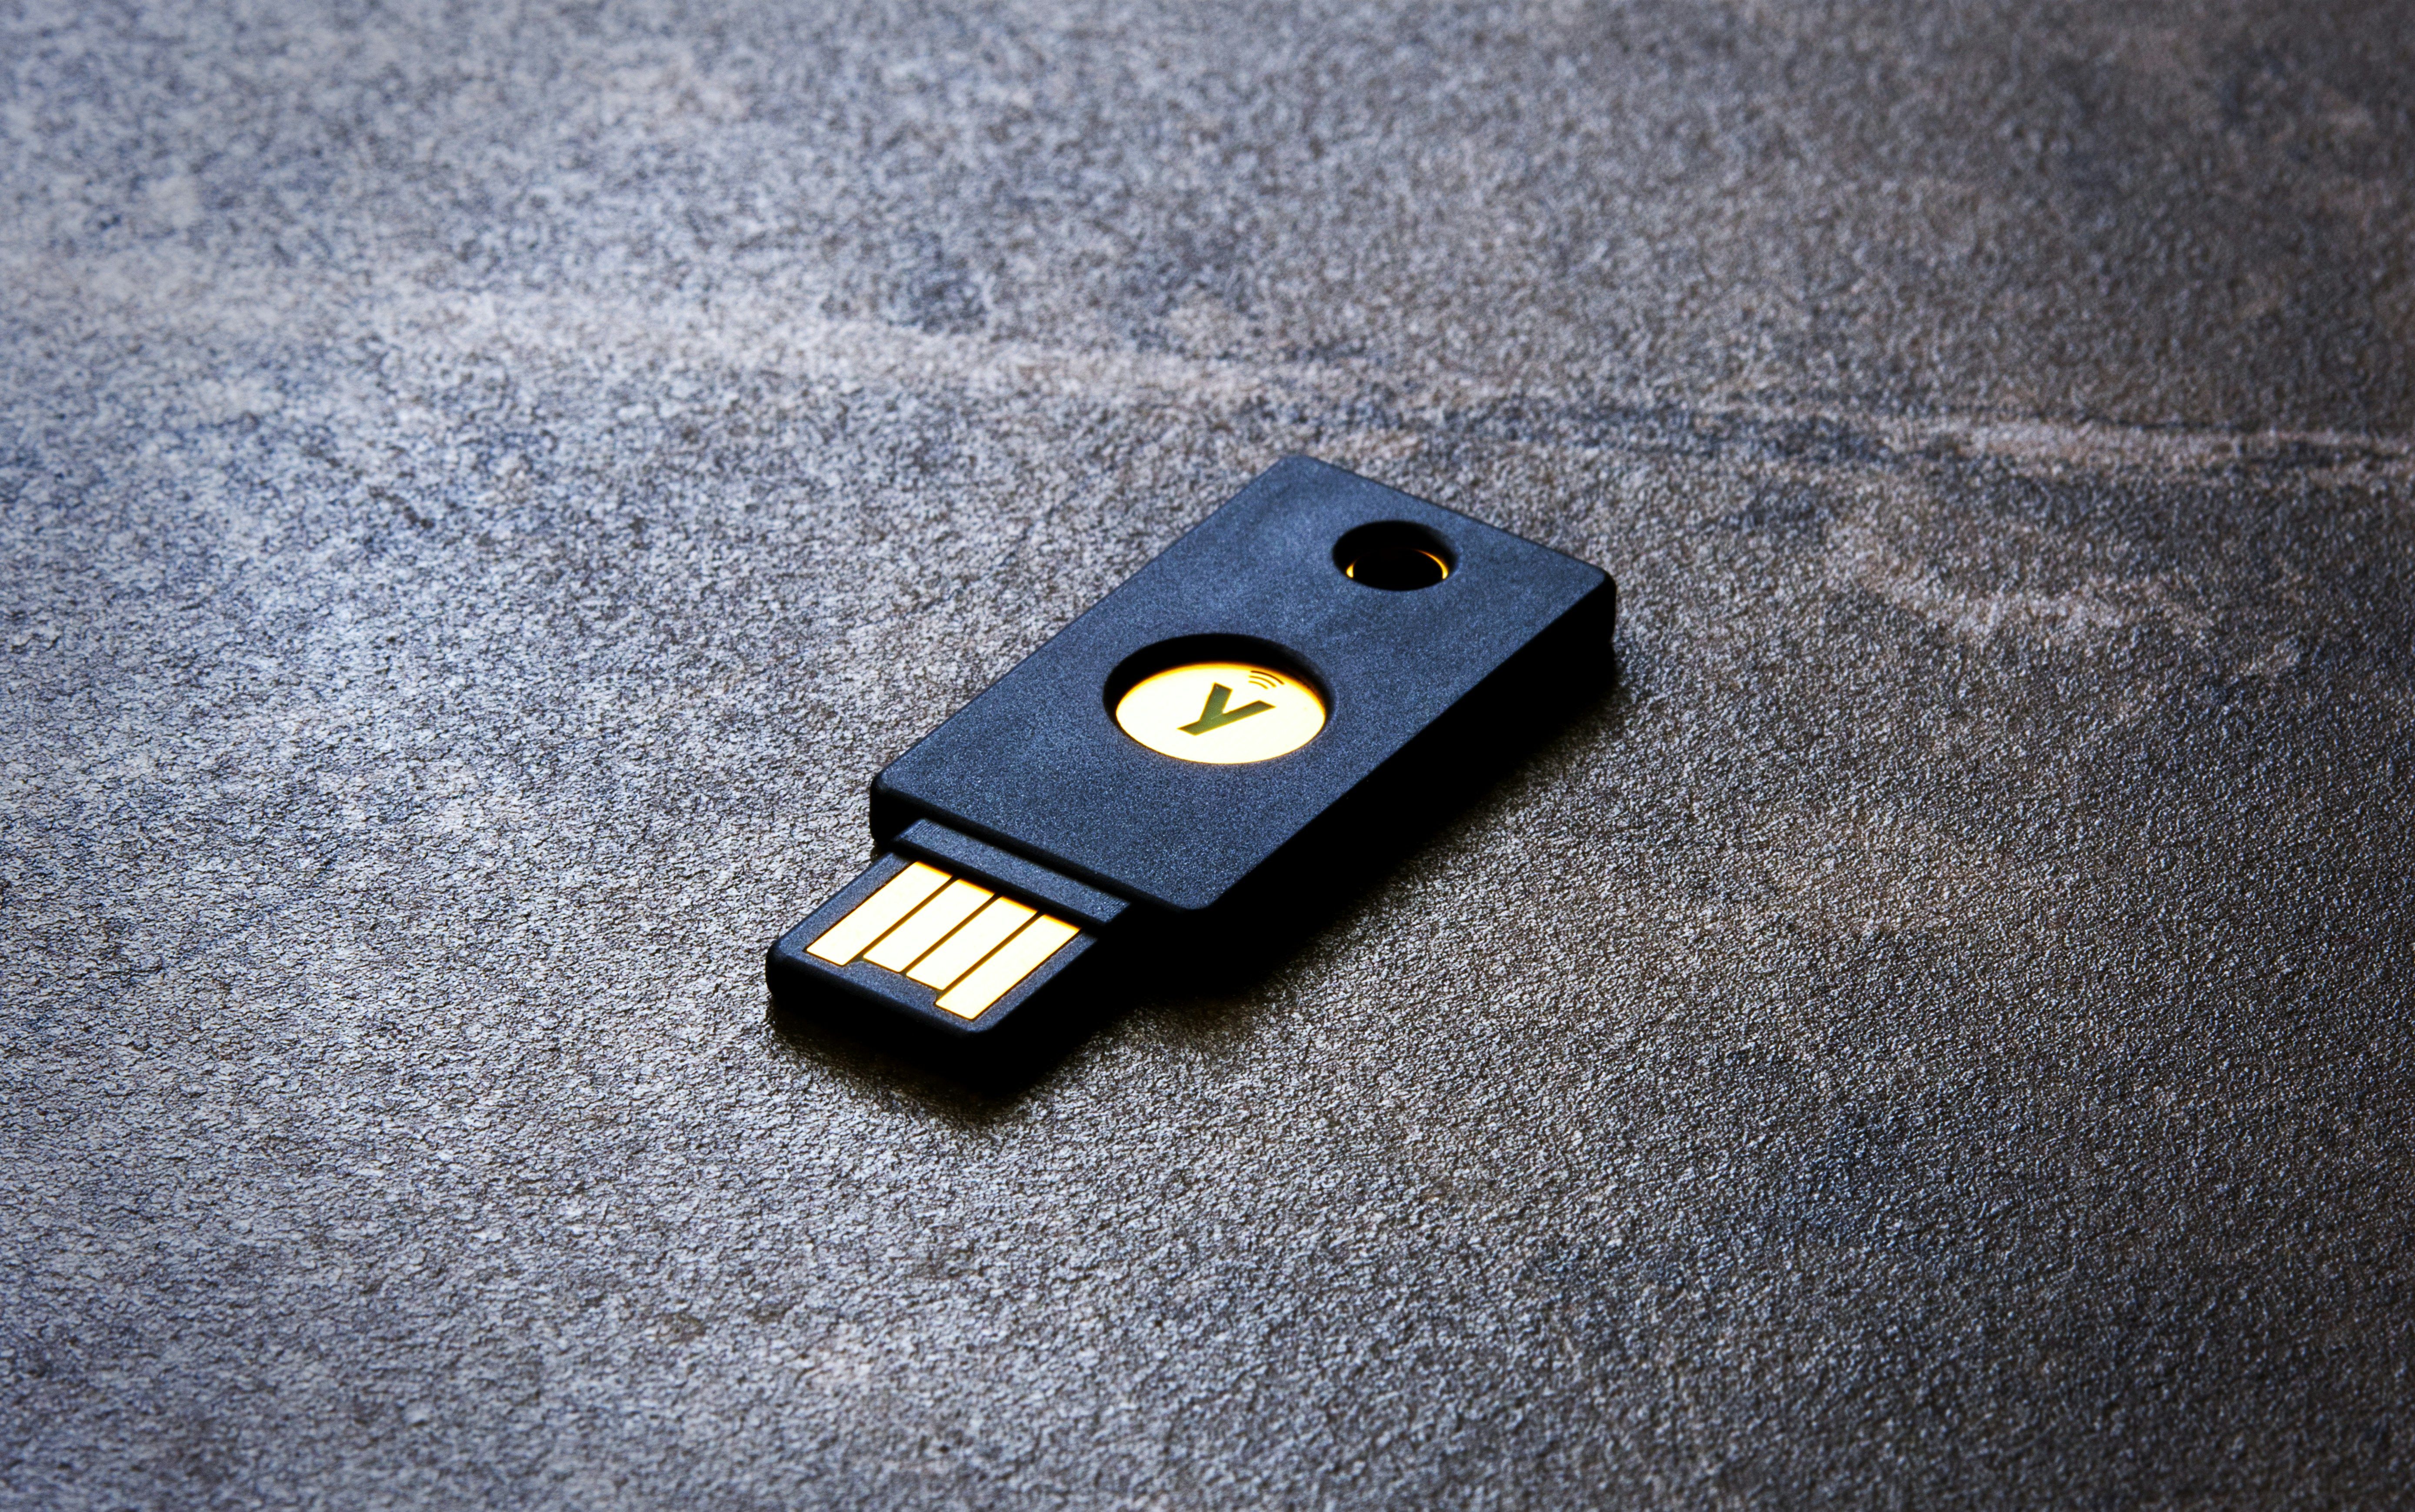 Here's why you should get a YubiKey